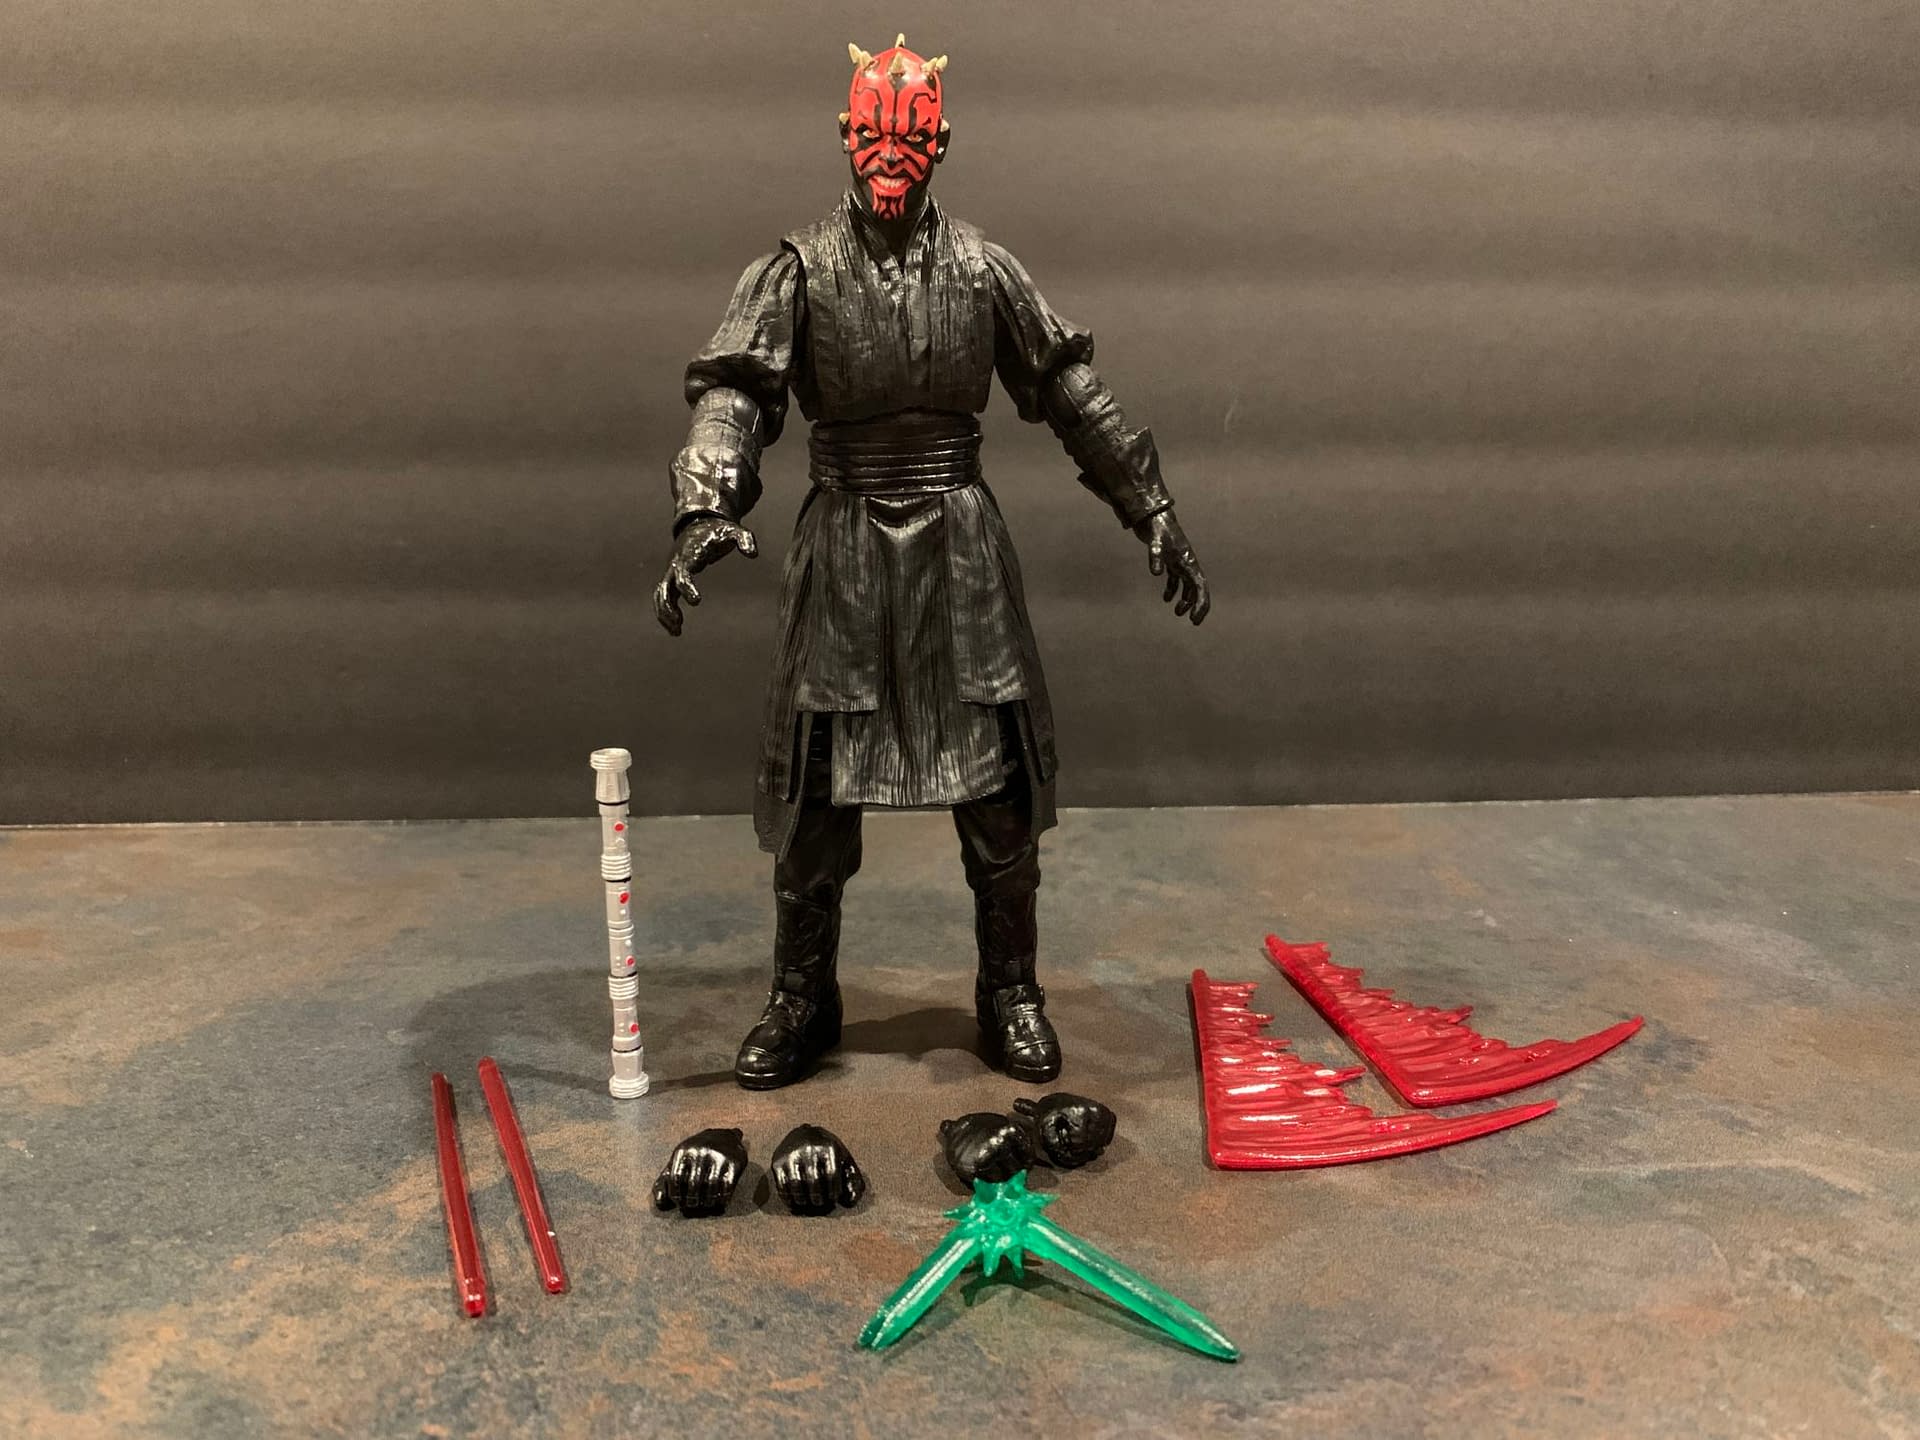 Let's Take A Look At Diamond Select's New Star Wars Darth Maul Figure